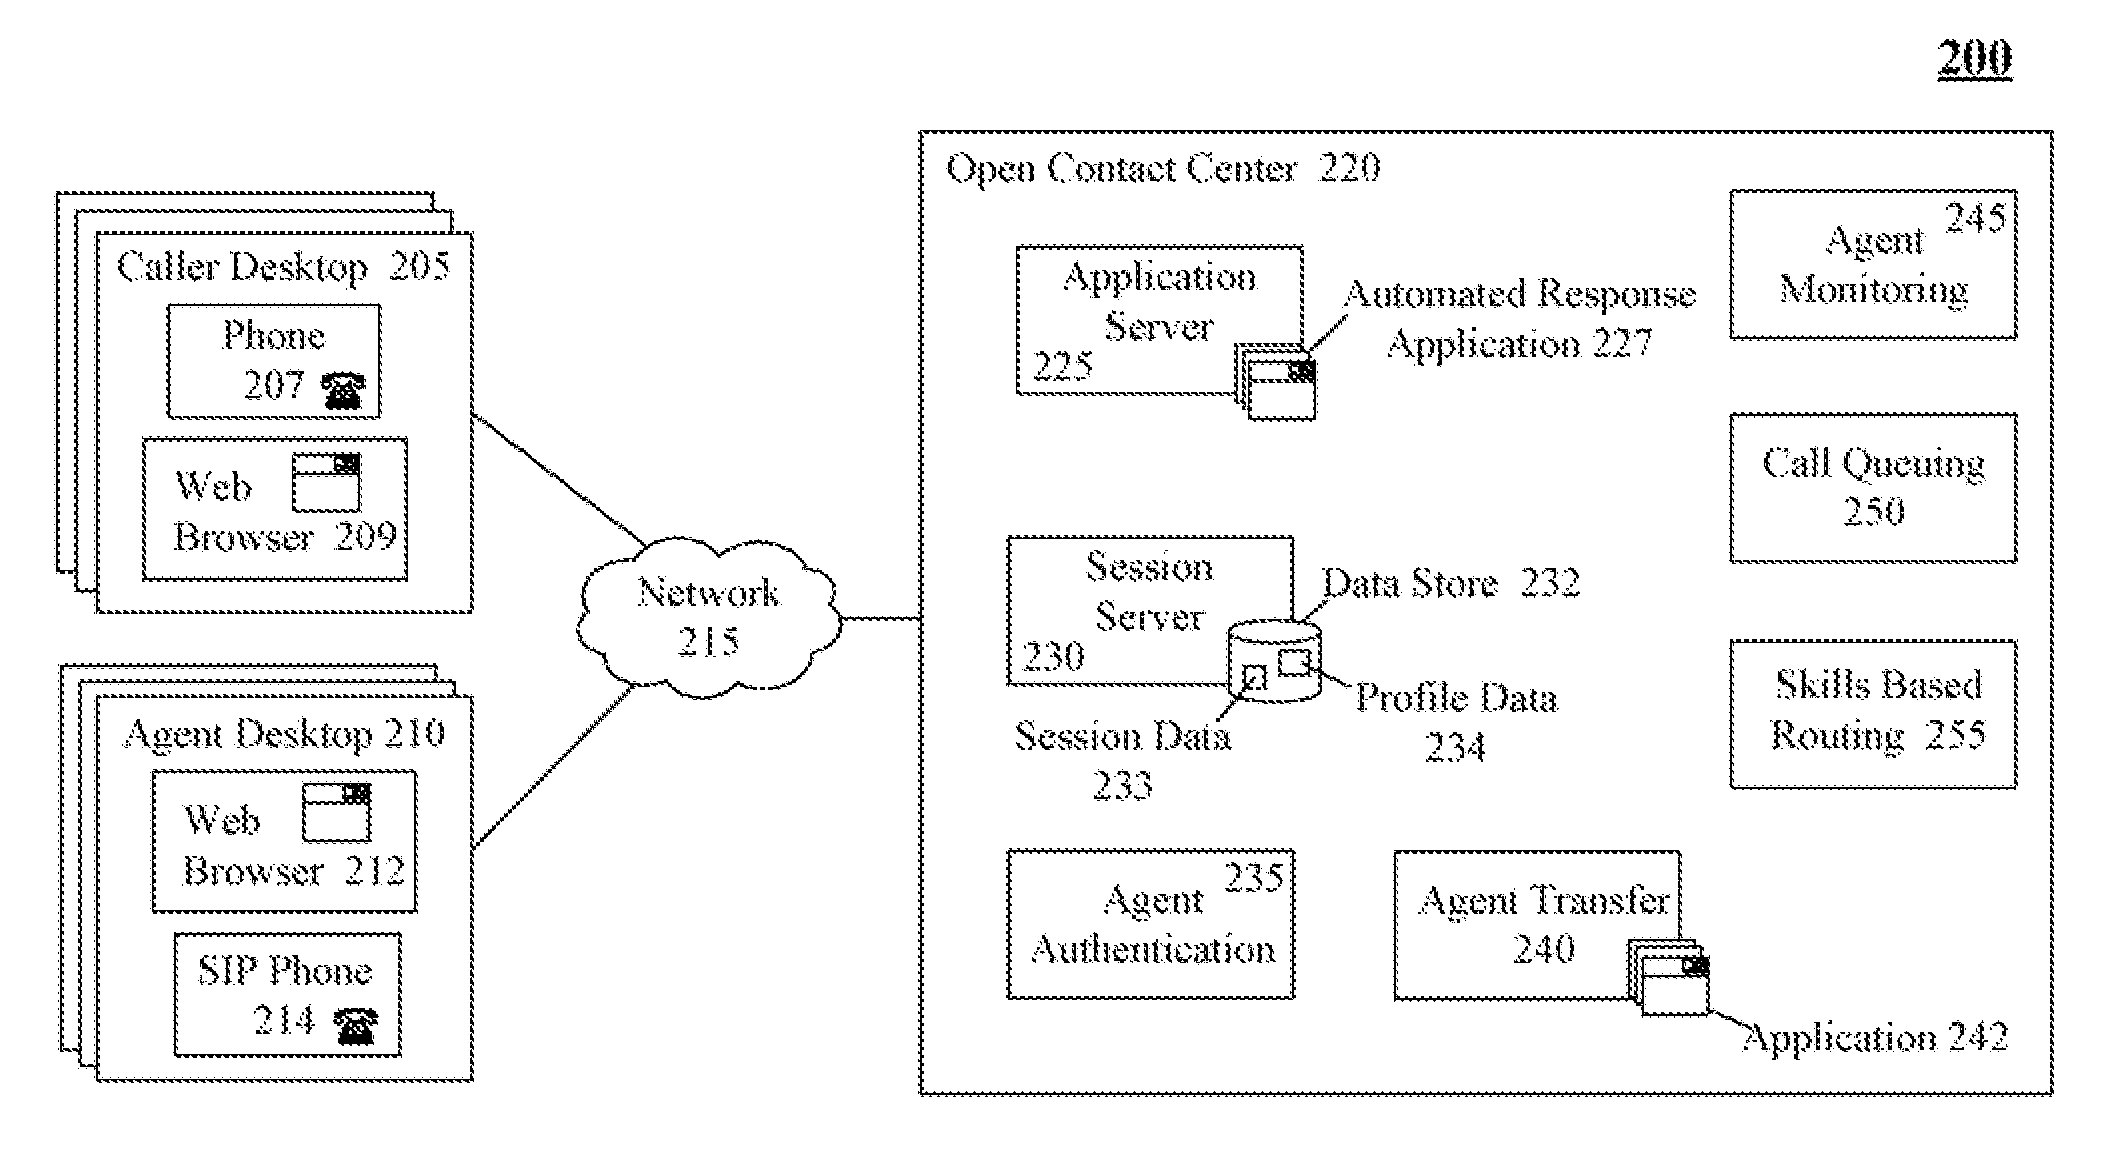 Standards based agent desktop for use with an open contact center solution